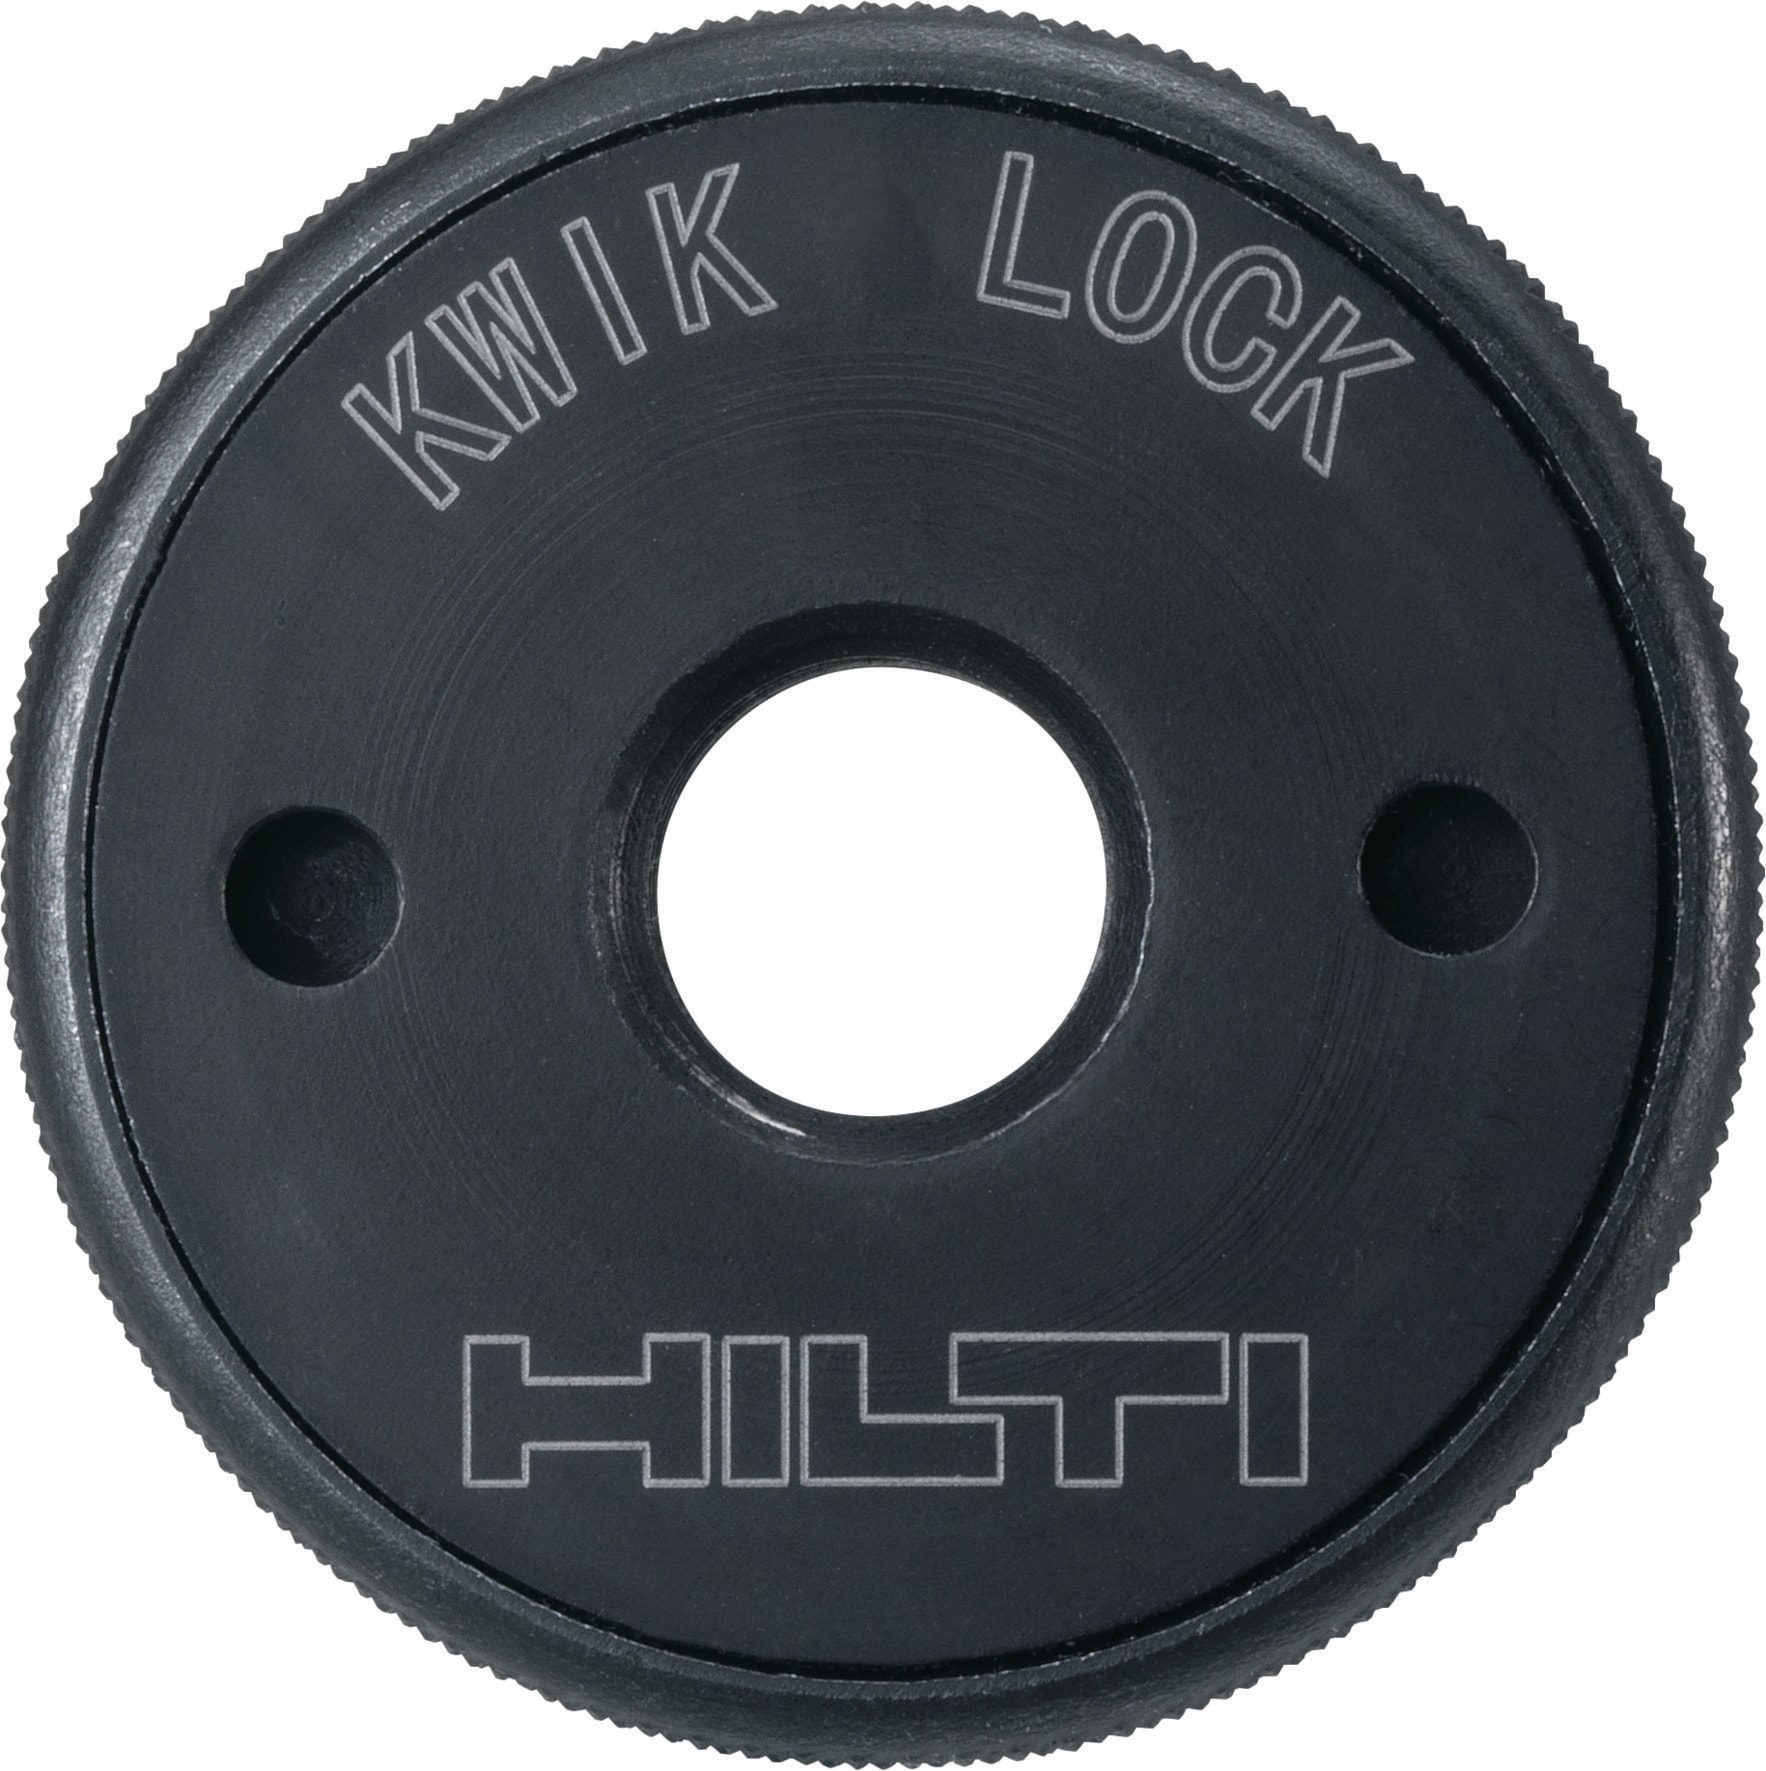 Hilti 1/2inch Quick Release Nut M14 Screw Fit For Bosch-Metabo-Makita Angle Grinder 